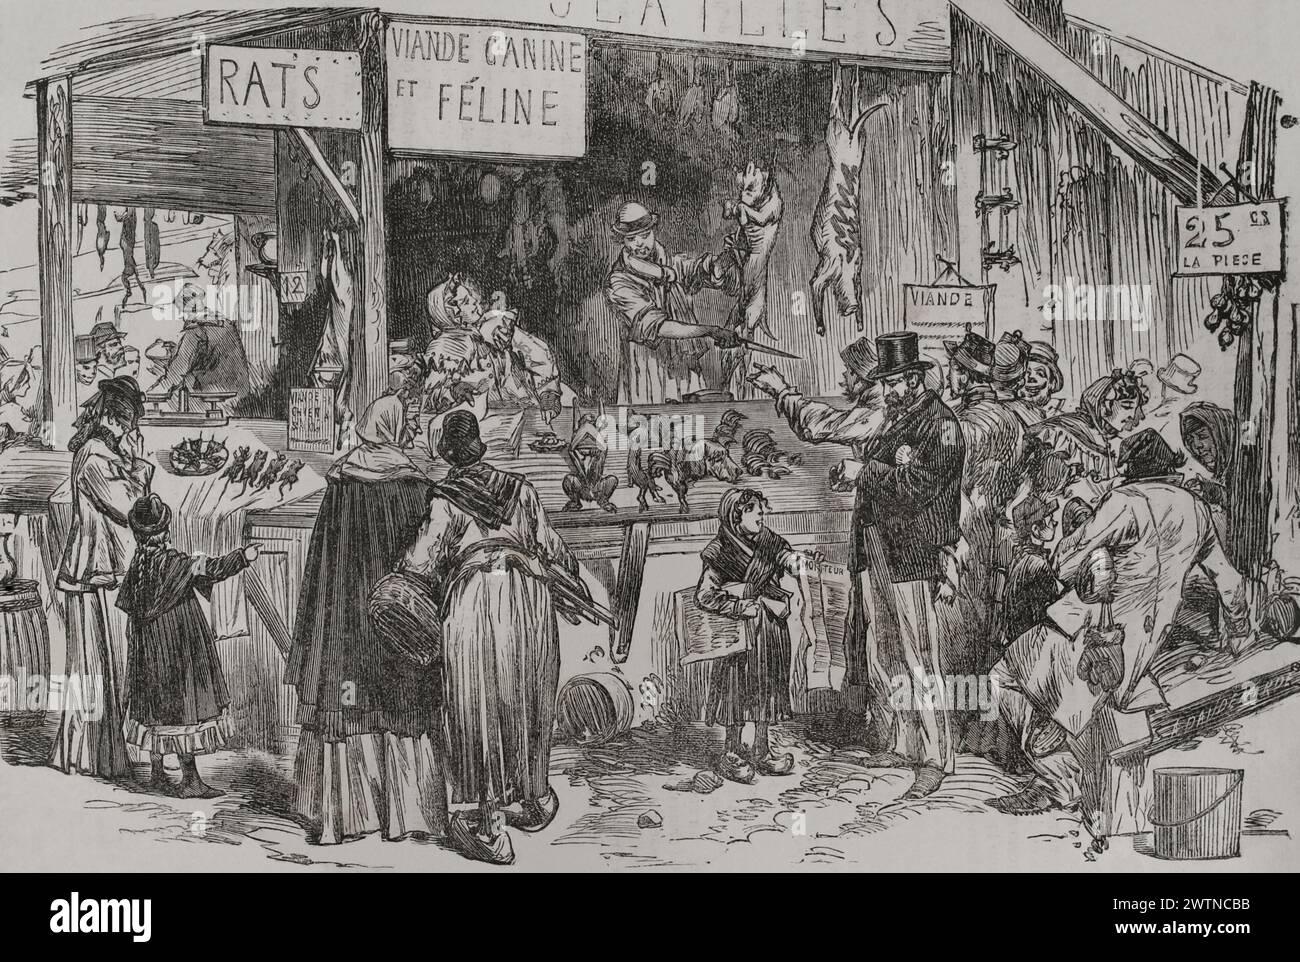 Franco-Prussian War (1870-1871). Siege of Paris (19 September 1870 to 28 January 1871). Stall selling dog, cat and rat meat in the Faubourg Saint-Germain during the siege of the city. Engraving. 'Historia de la Guerra de Francia y Prusia' (History of the War between France and Prussia). Volume II. Published in Barcelona, 1871. Stock Photo